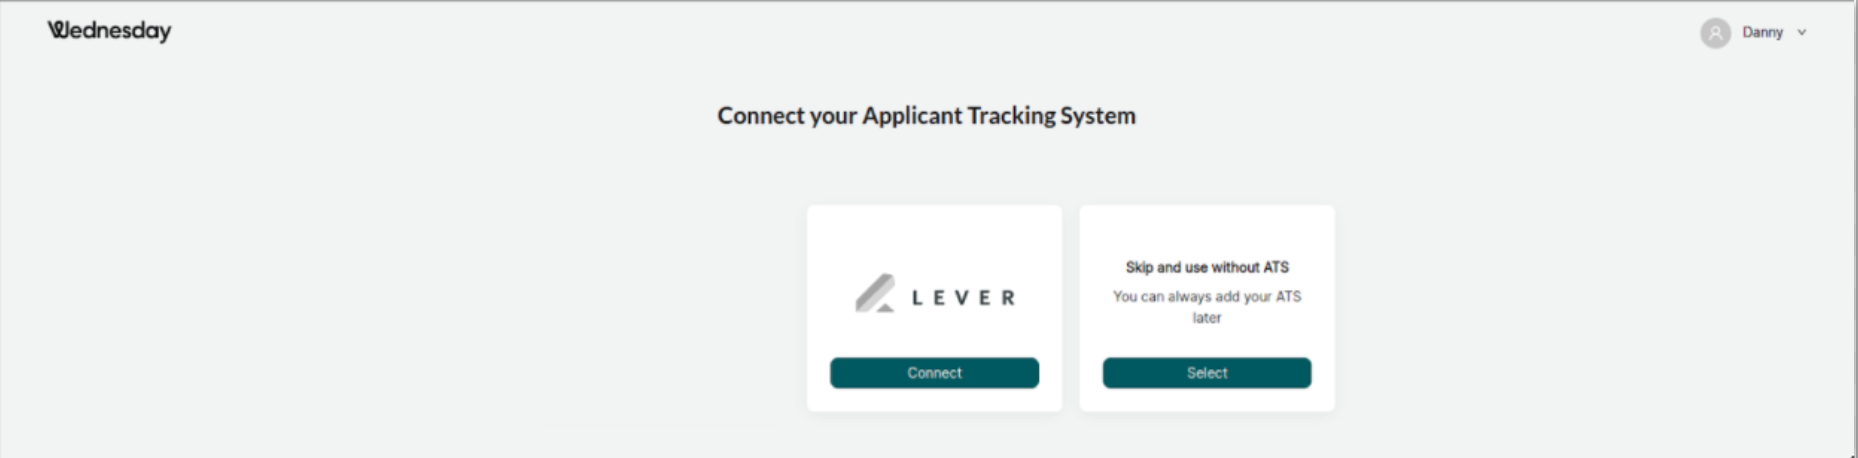 Wednesday platform showing Lever tile in connect your applicant tracking system page